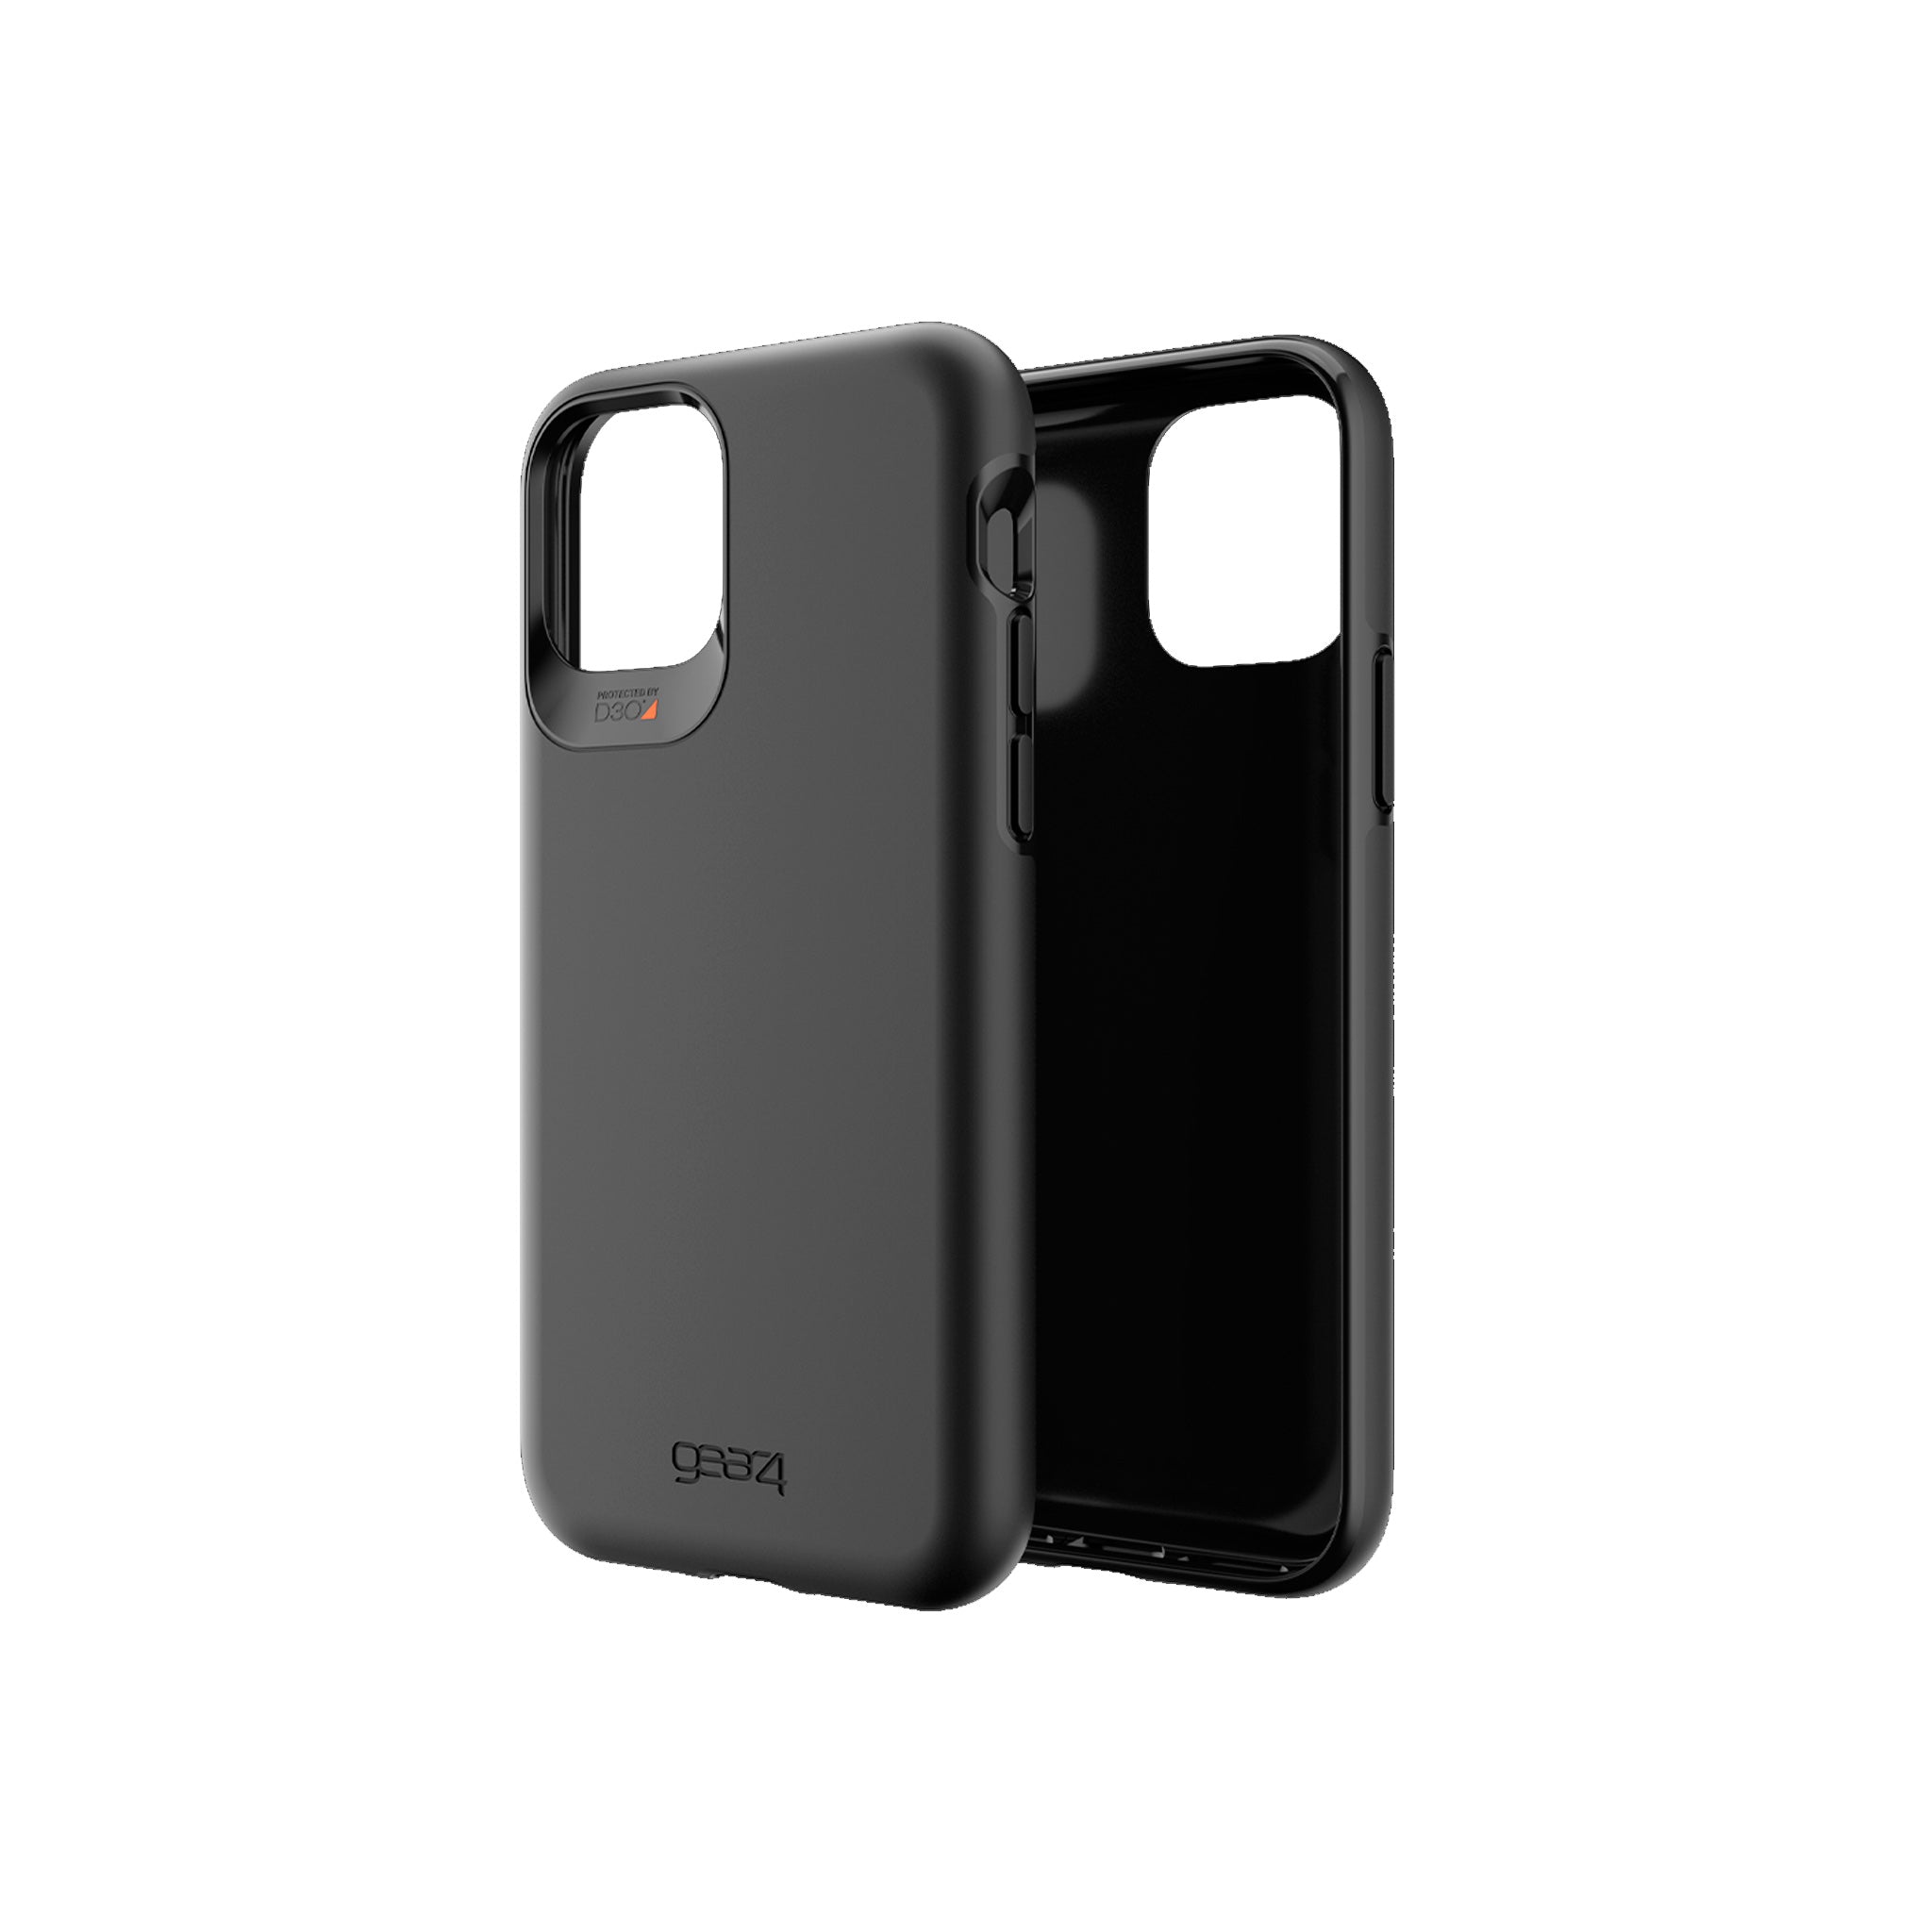 Gear4 - Holborn Case For Apple Iphone 11 Pro - Black